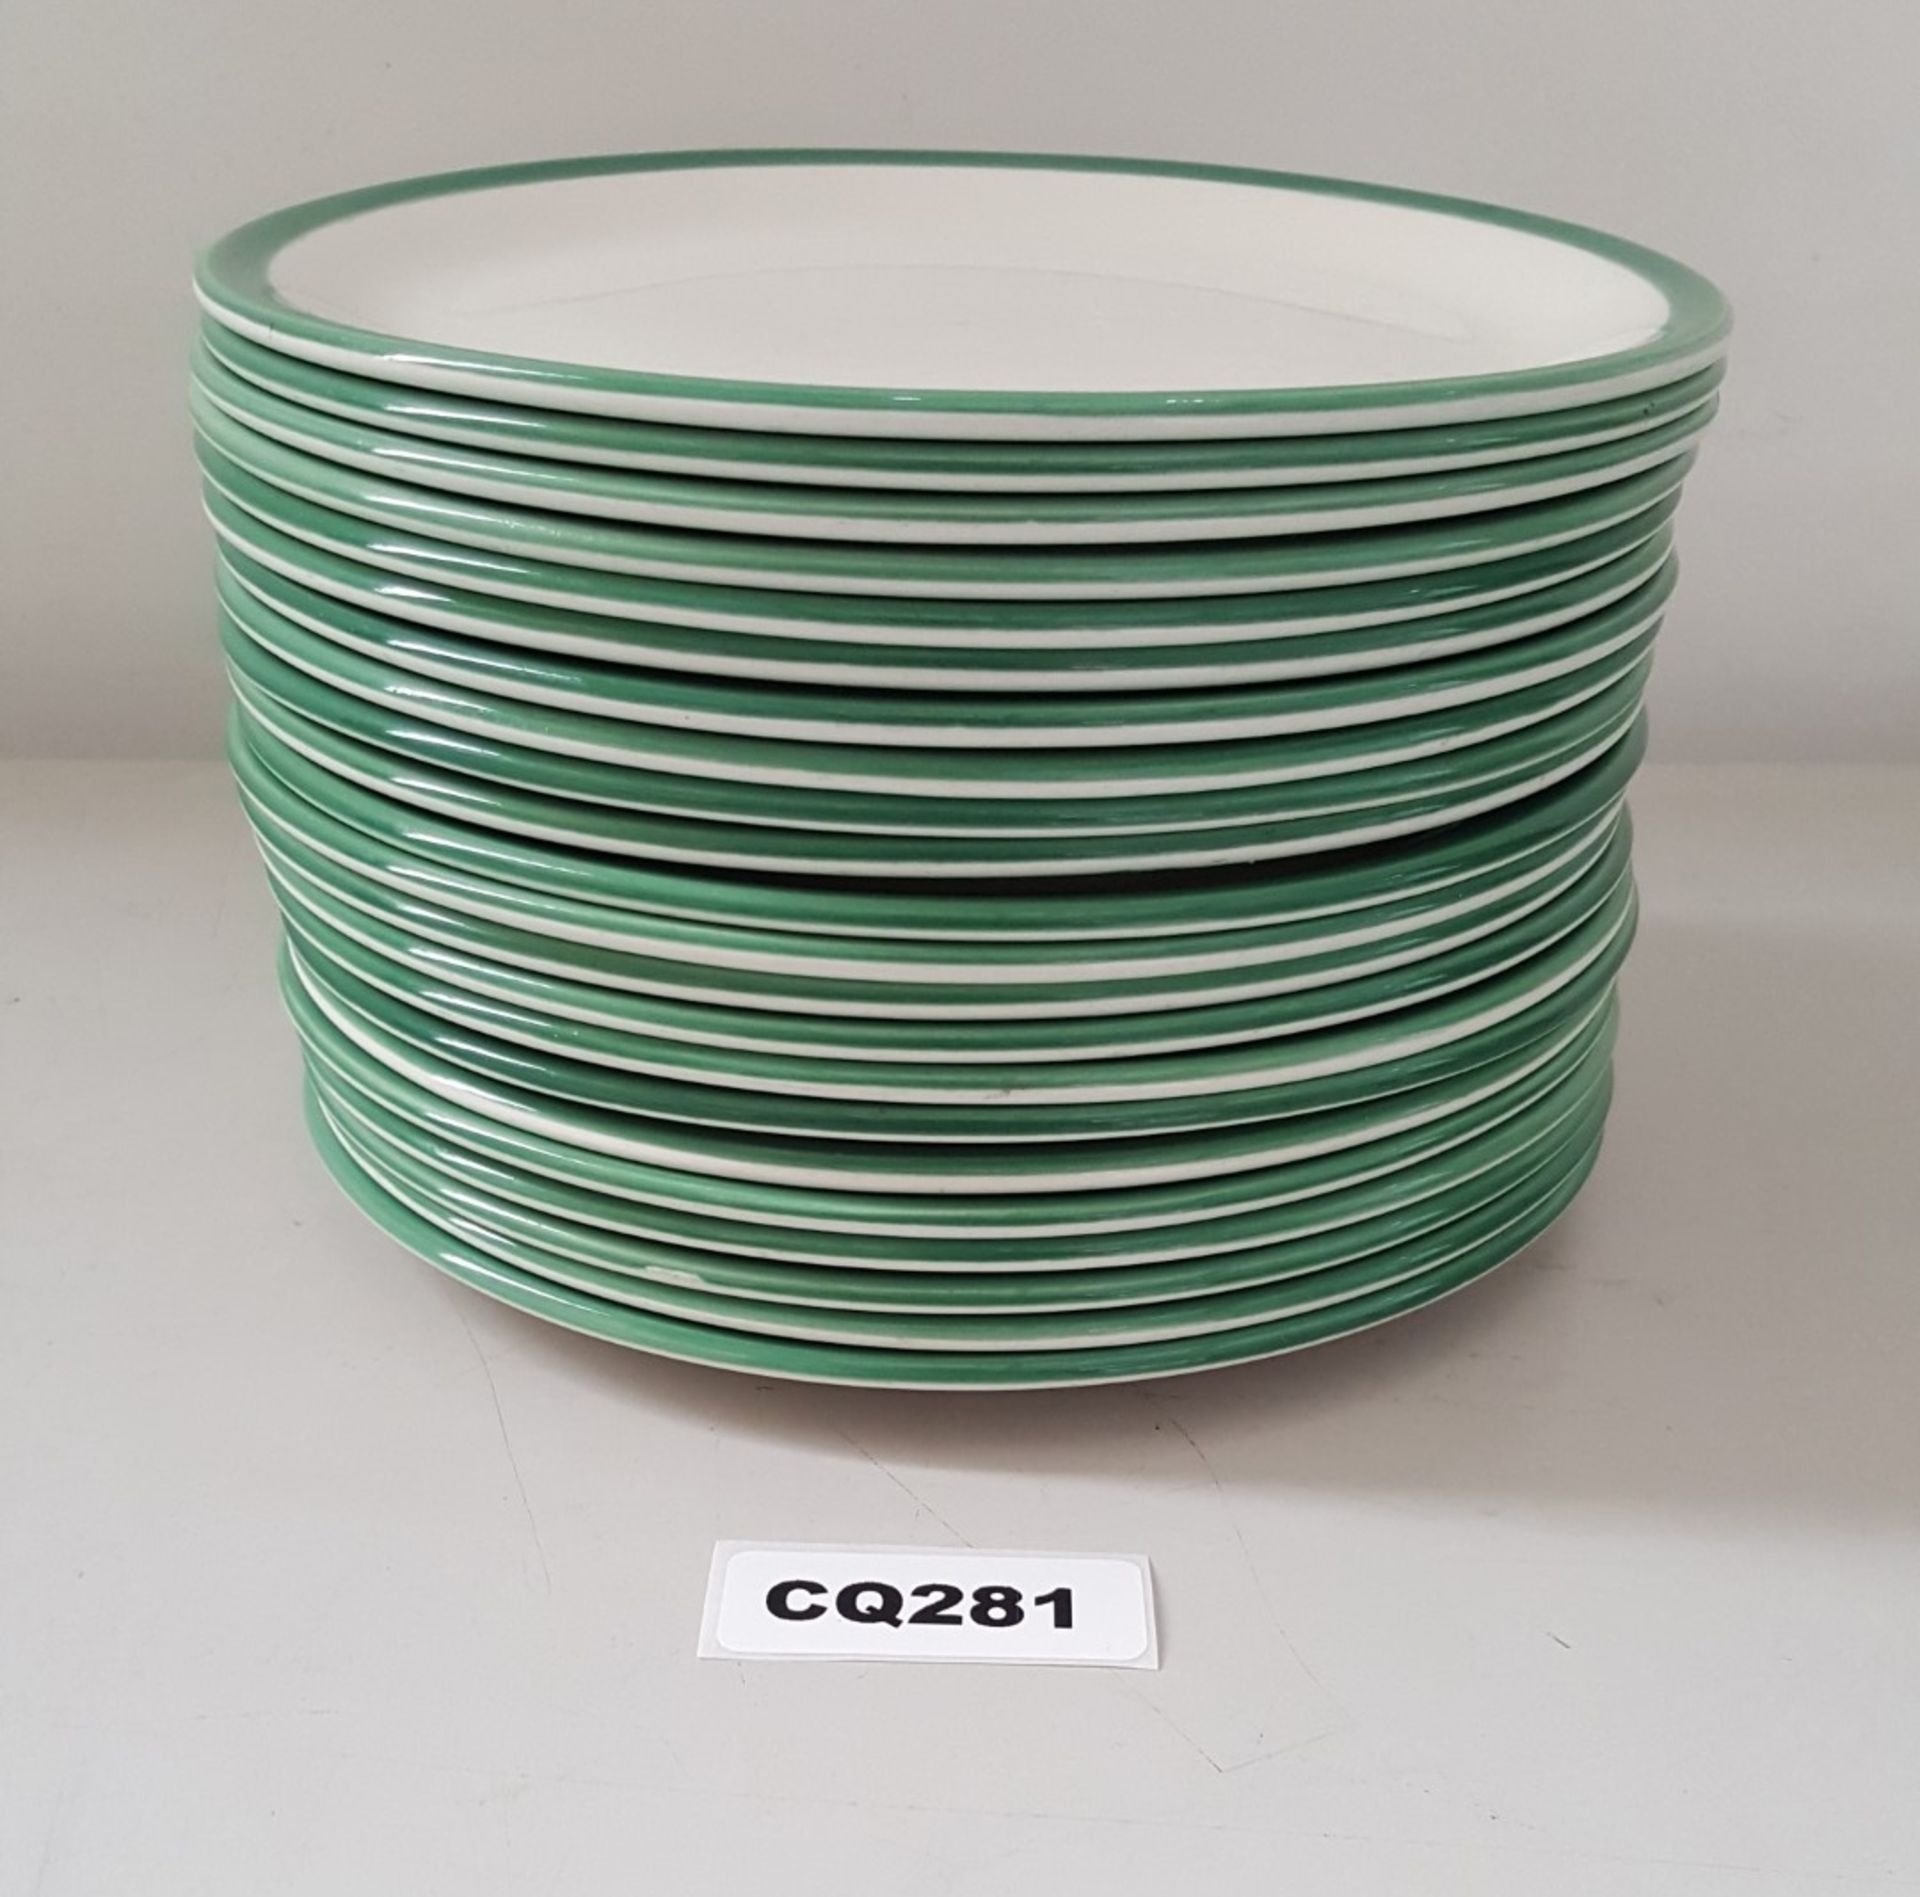 22 x Steelite Coupe Plates White With Green Outline Egde 20CM - Ref CQ281 - Image 3 of 4